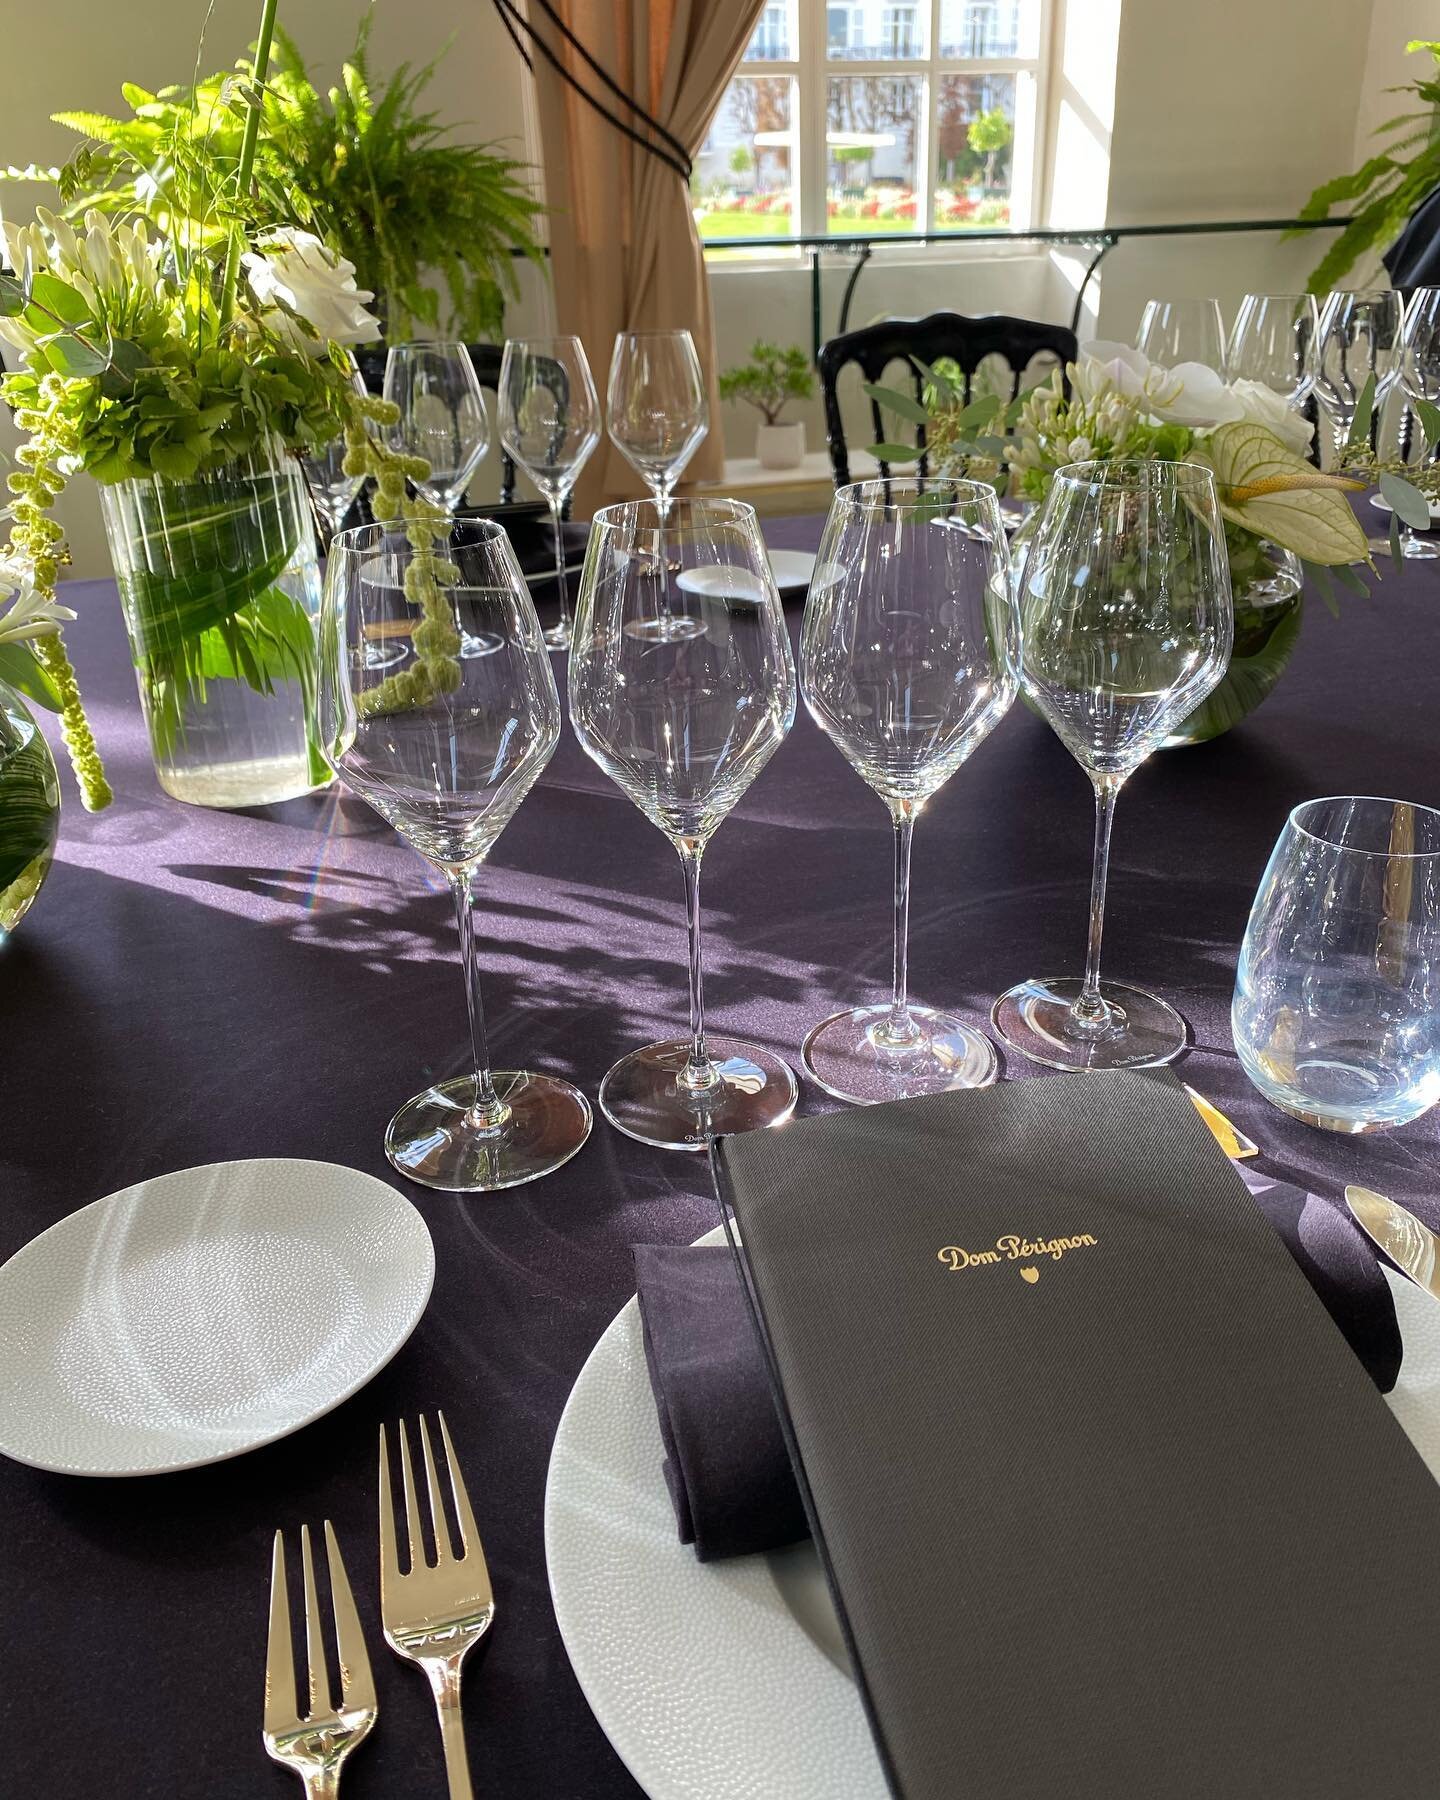 Thank you to the teams at Dom P&eacute;rignon and LVMH for allowing us to host an exquisite, never to be repeated private Dom P&eacute;rignon pairing lunch for our guests in the gorgeous Orangerie in Epernay. The cuv&eacute;es tasted included the phe